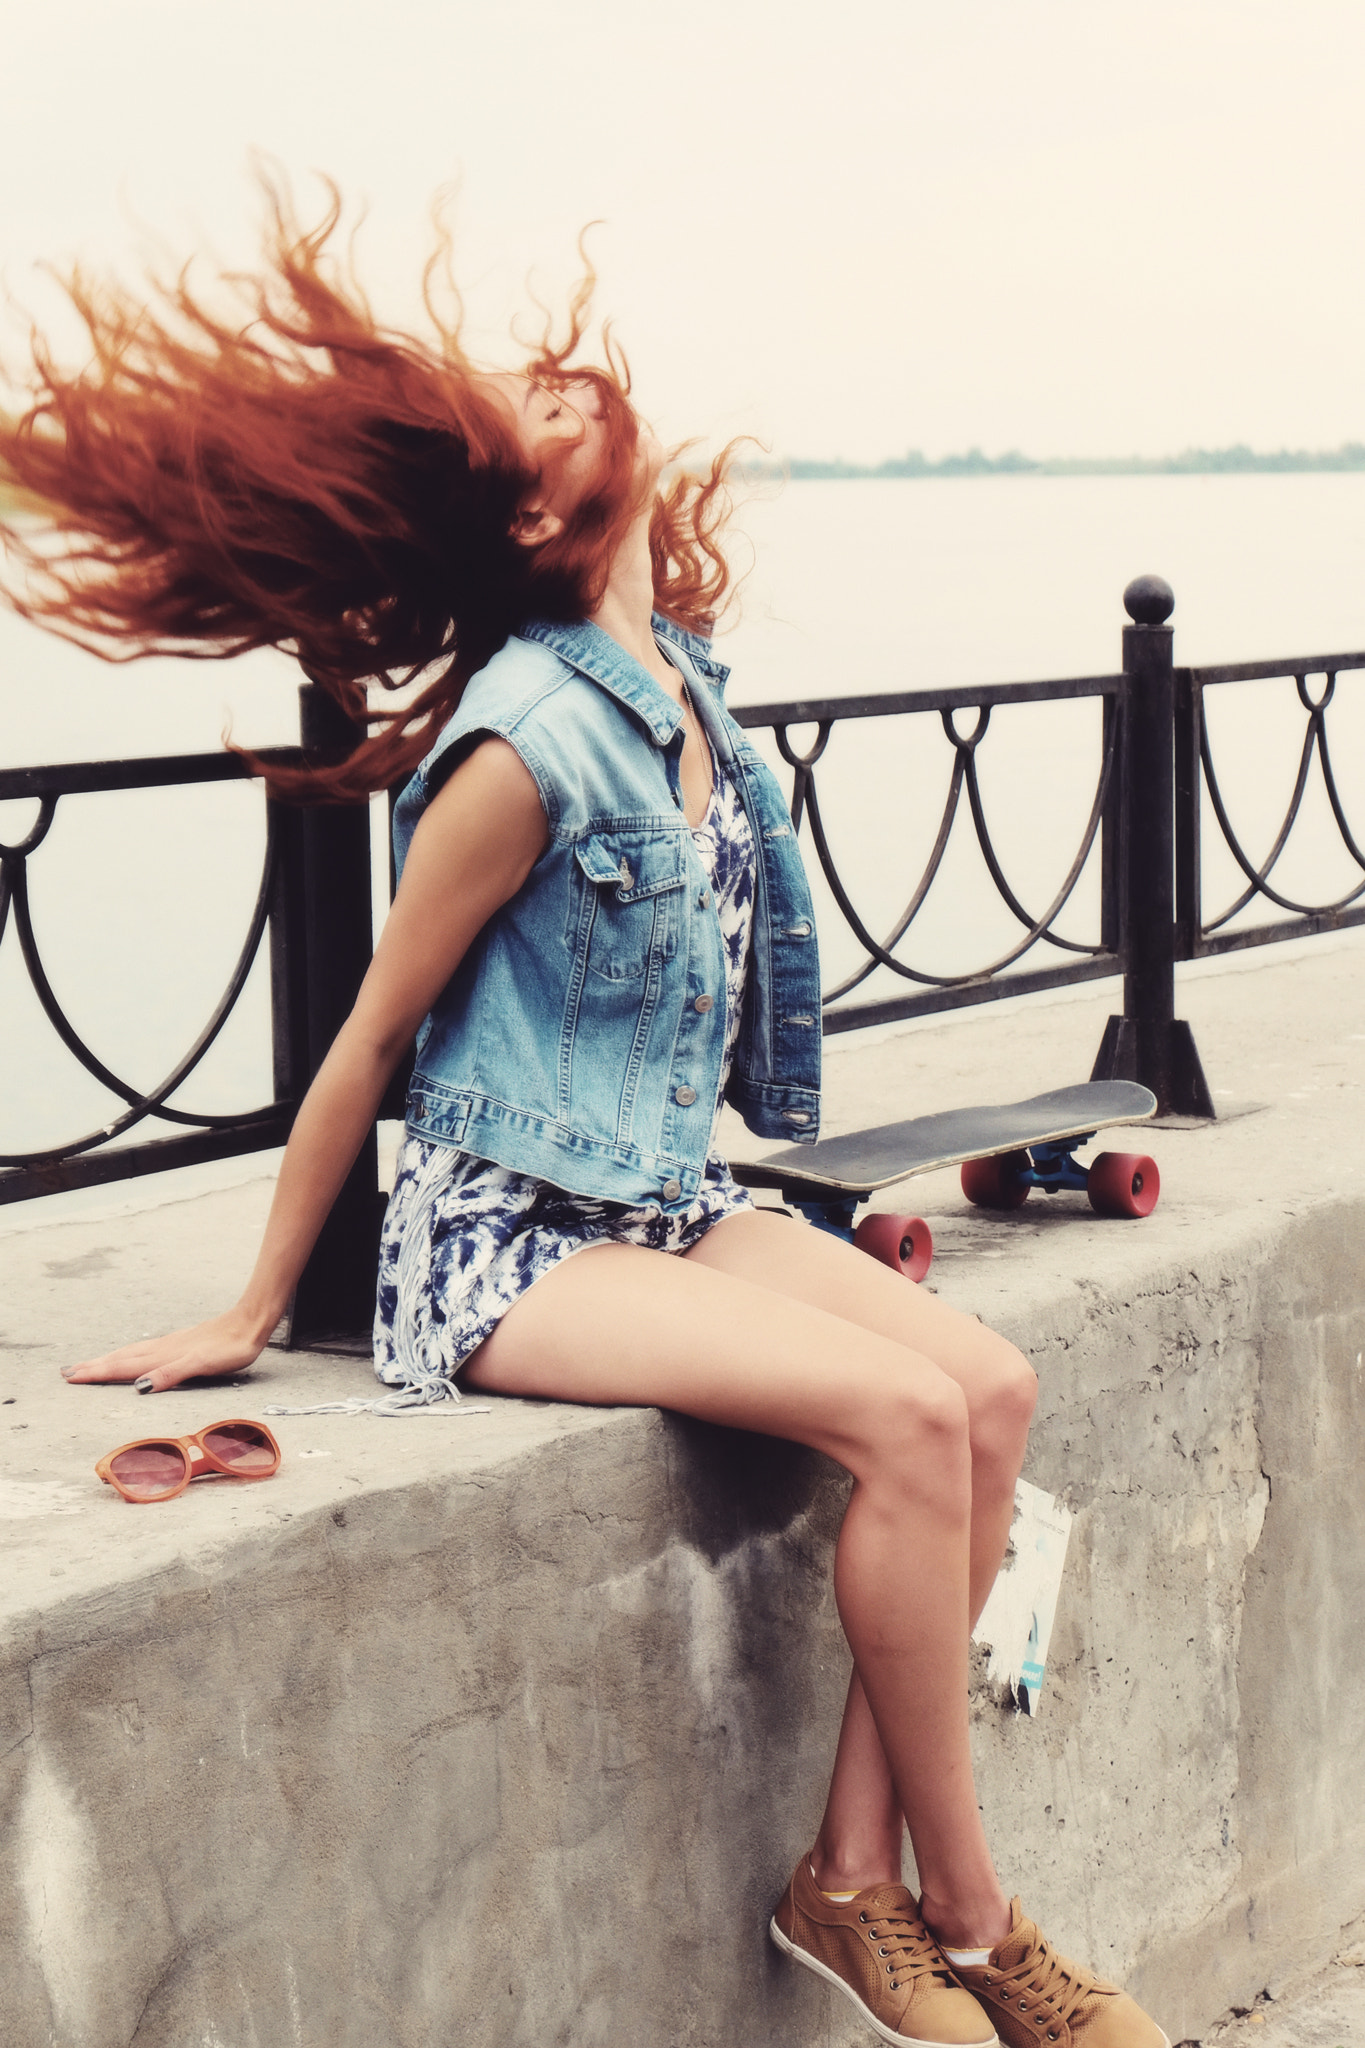 Toned image of young women sitting with skateboard on parapet and shake her hair